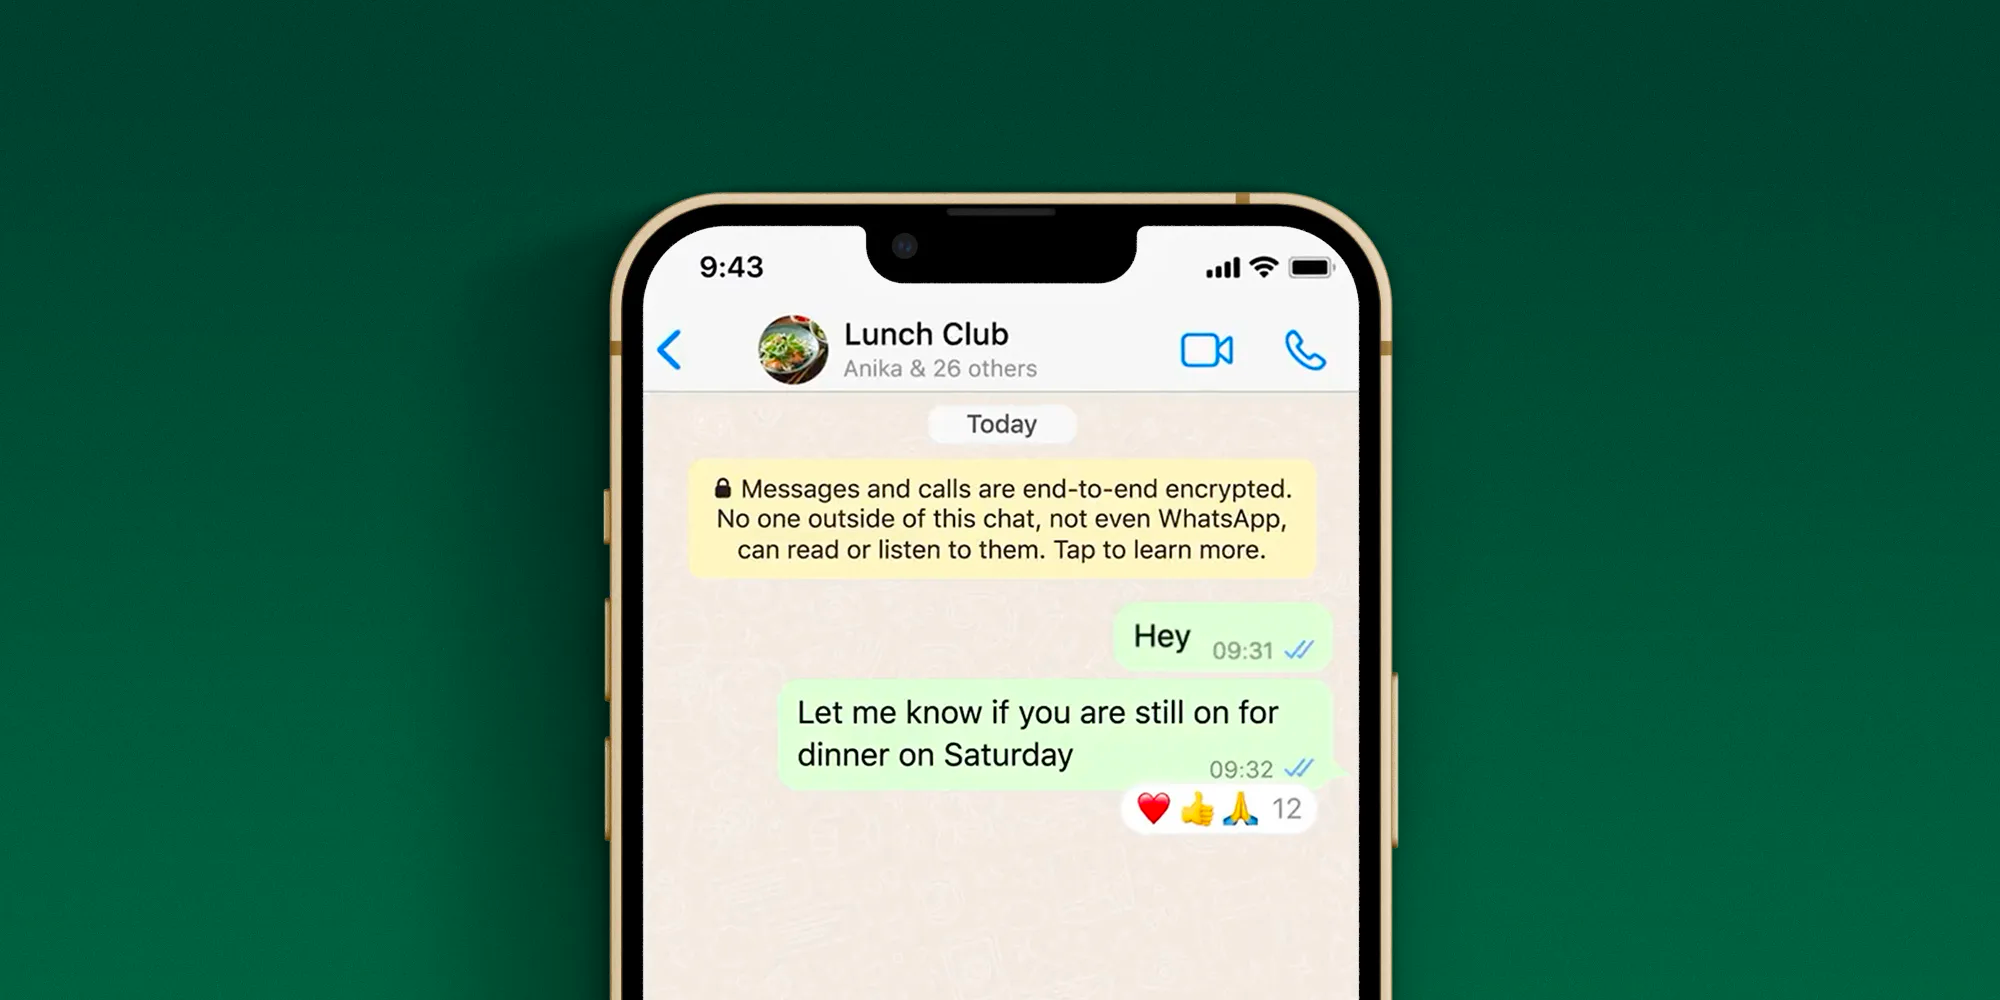 WhatsApp announces long-awaited Reactions and Community features